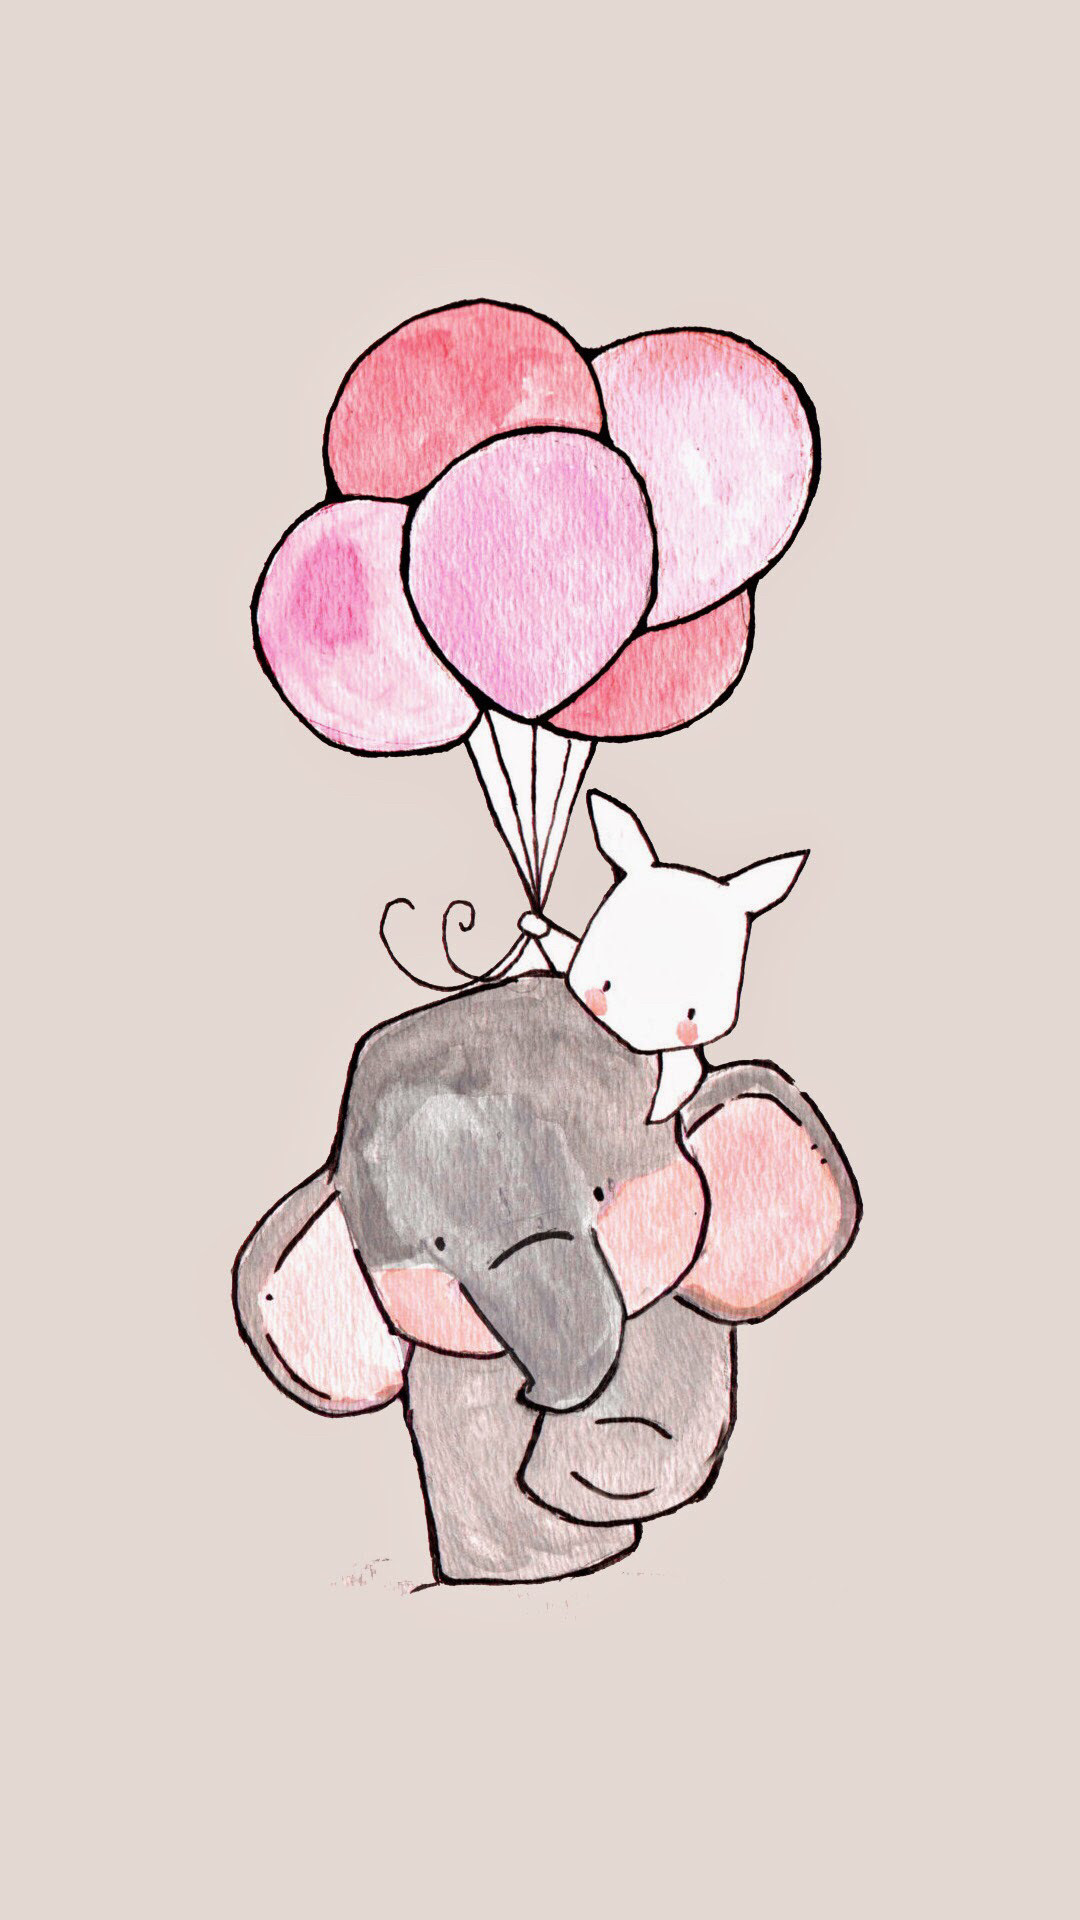 1080x1920 iphone wallpaper girly elephant and rabbit.